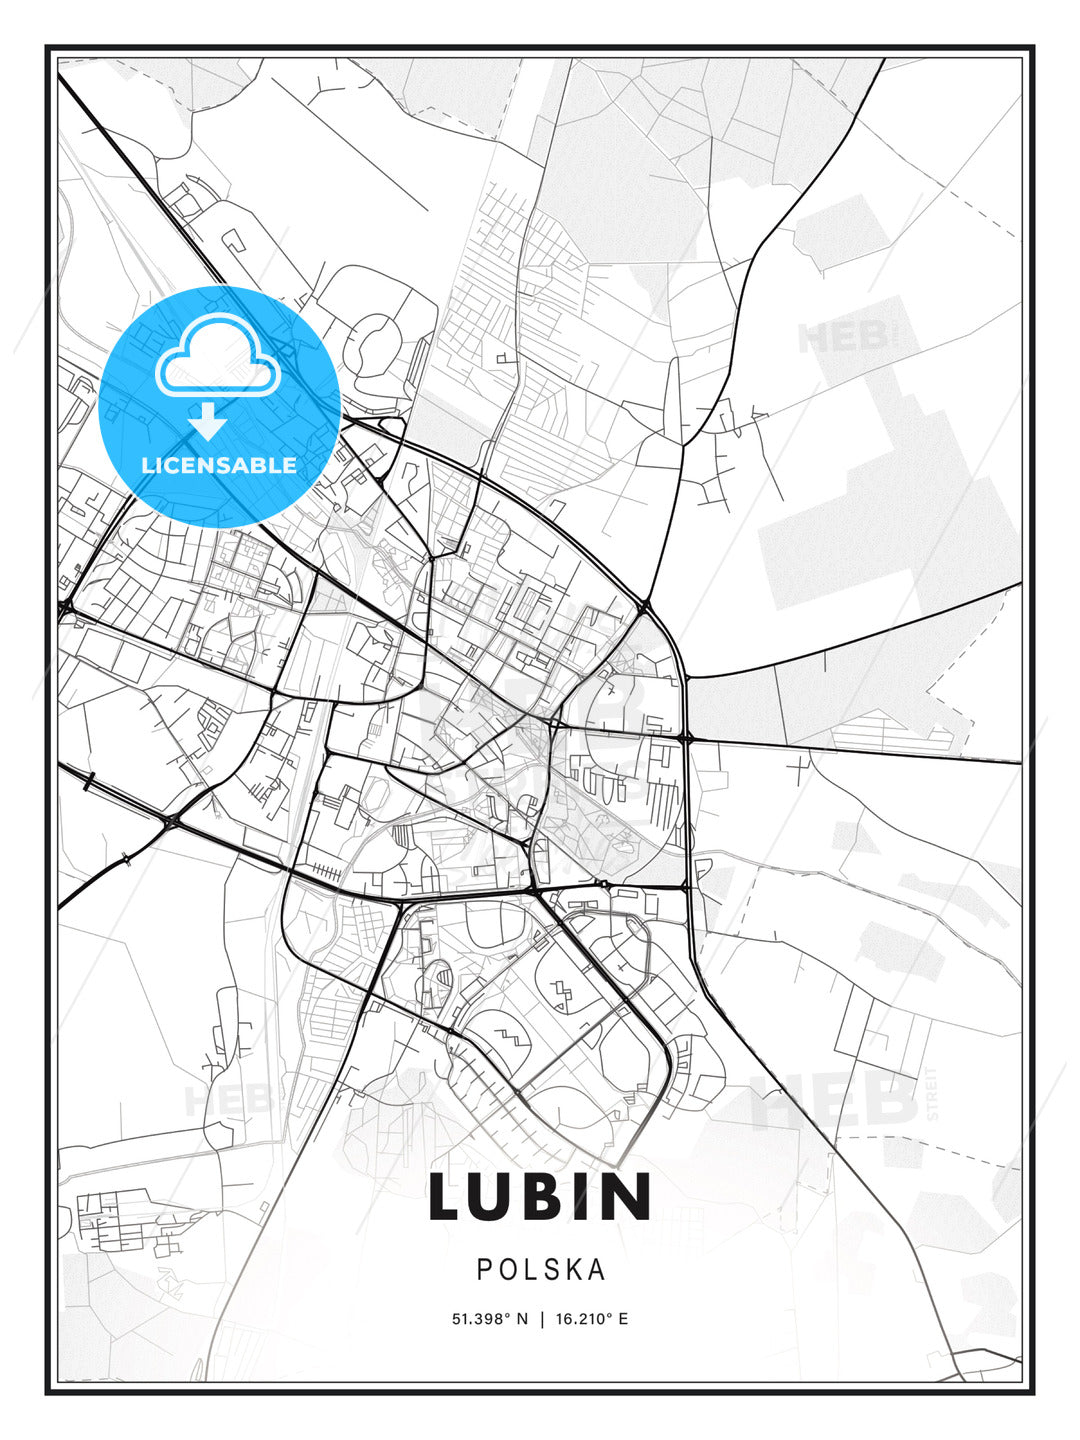 Lubin, Poland, Modern Print Template in Various Formats - HEBSTREITS Sketches